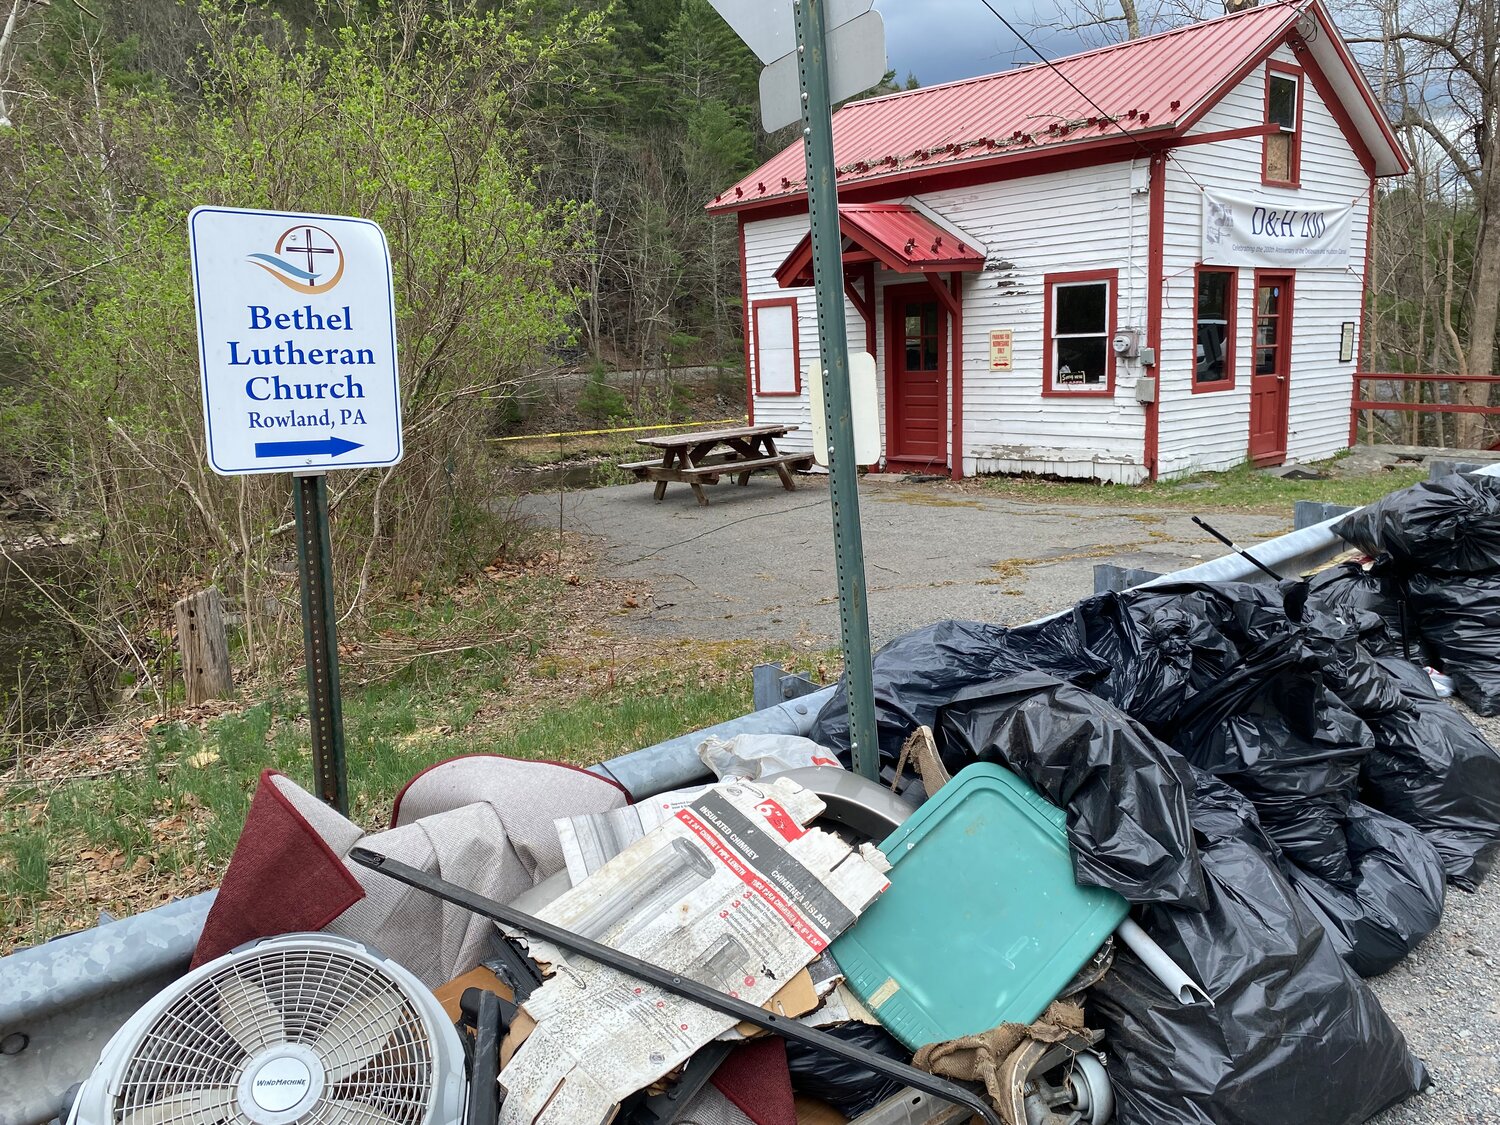 Members of the Lackawaxen River Conservancy collected litter and trash from roads along the Lackawaxen River on Saturday, April 15. The Litterpluck season has begun!